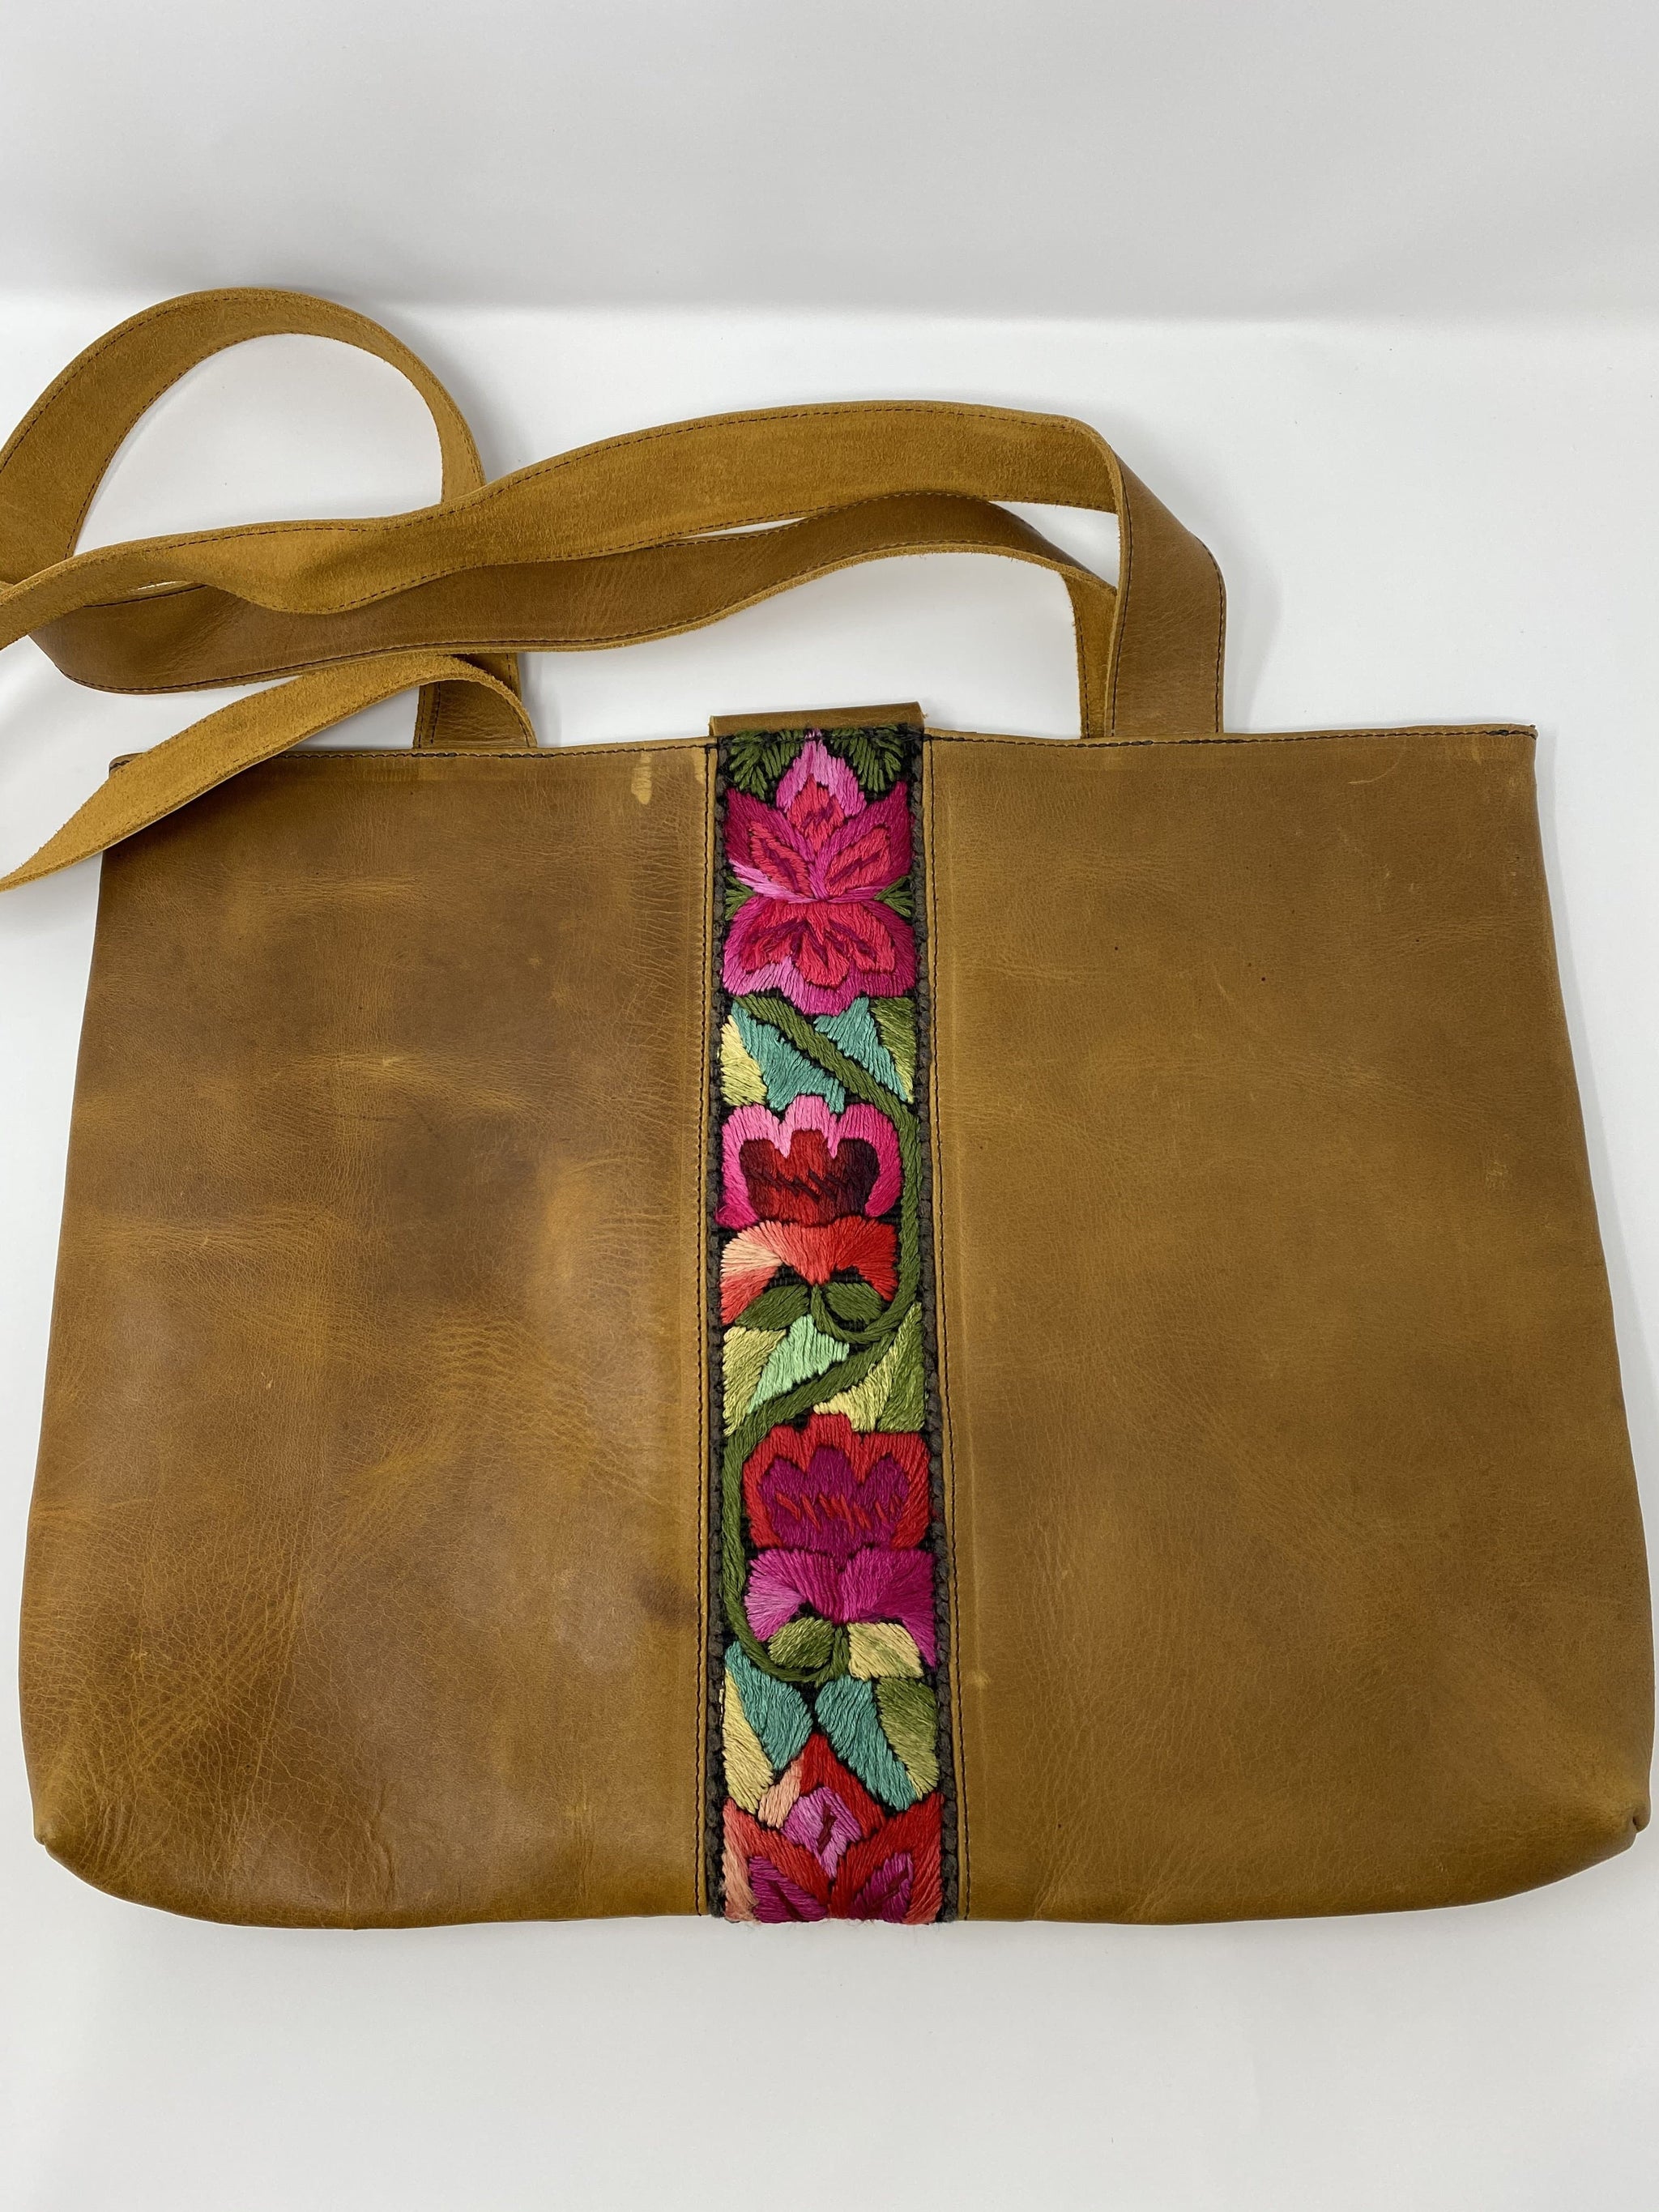 The Elio Genuine Leather Purse with Mayan Embroidery